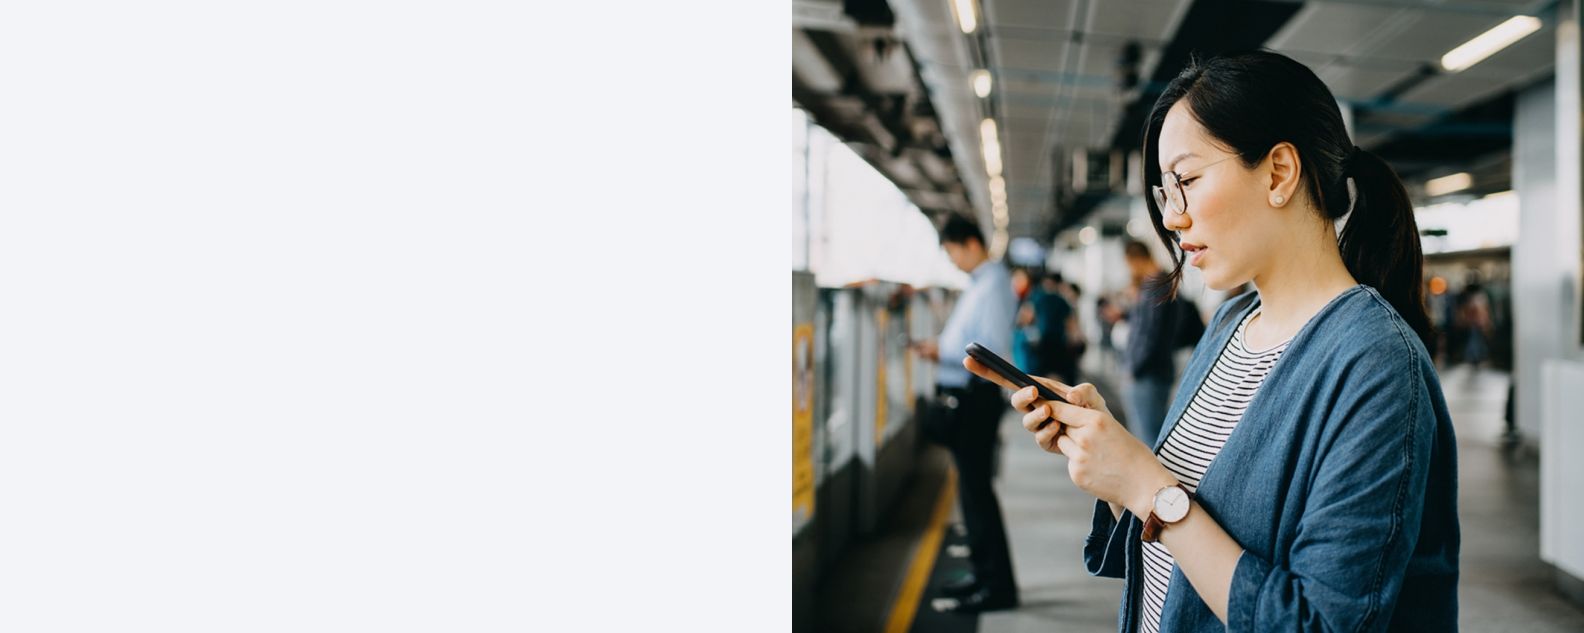 a commuter at a train station looks into a smartphone